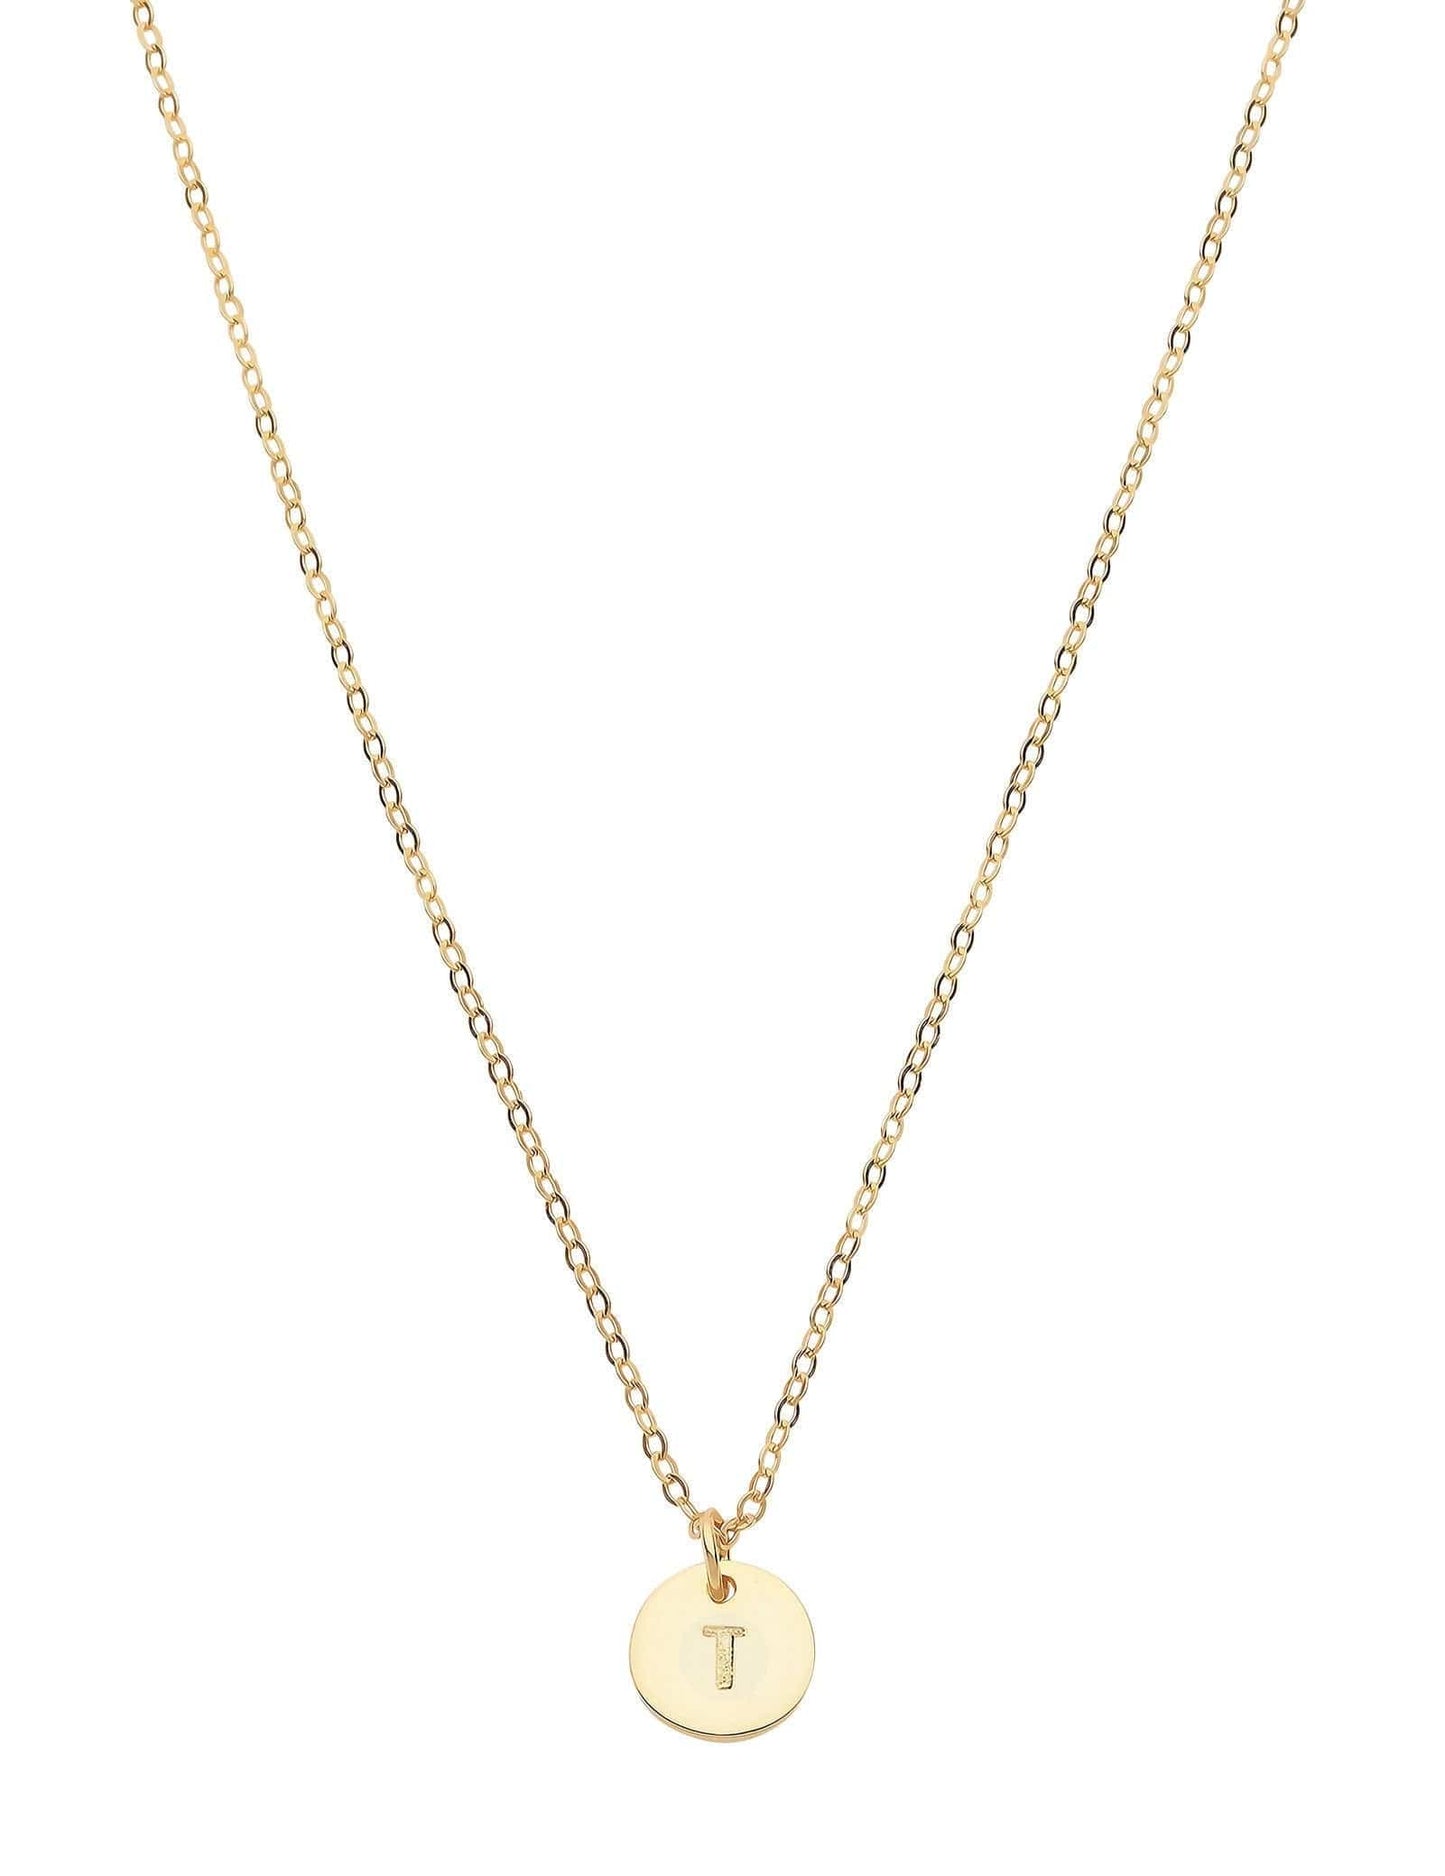 Dear Addison Yellow Gold Letter T Necklace